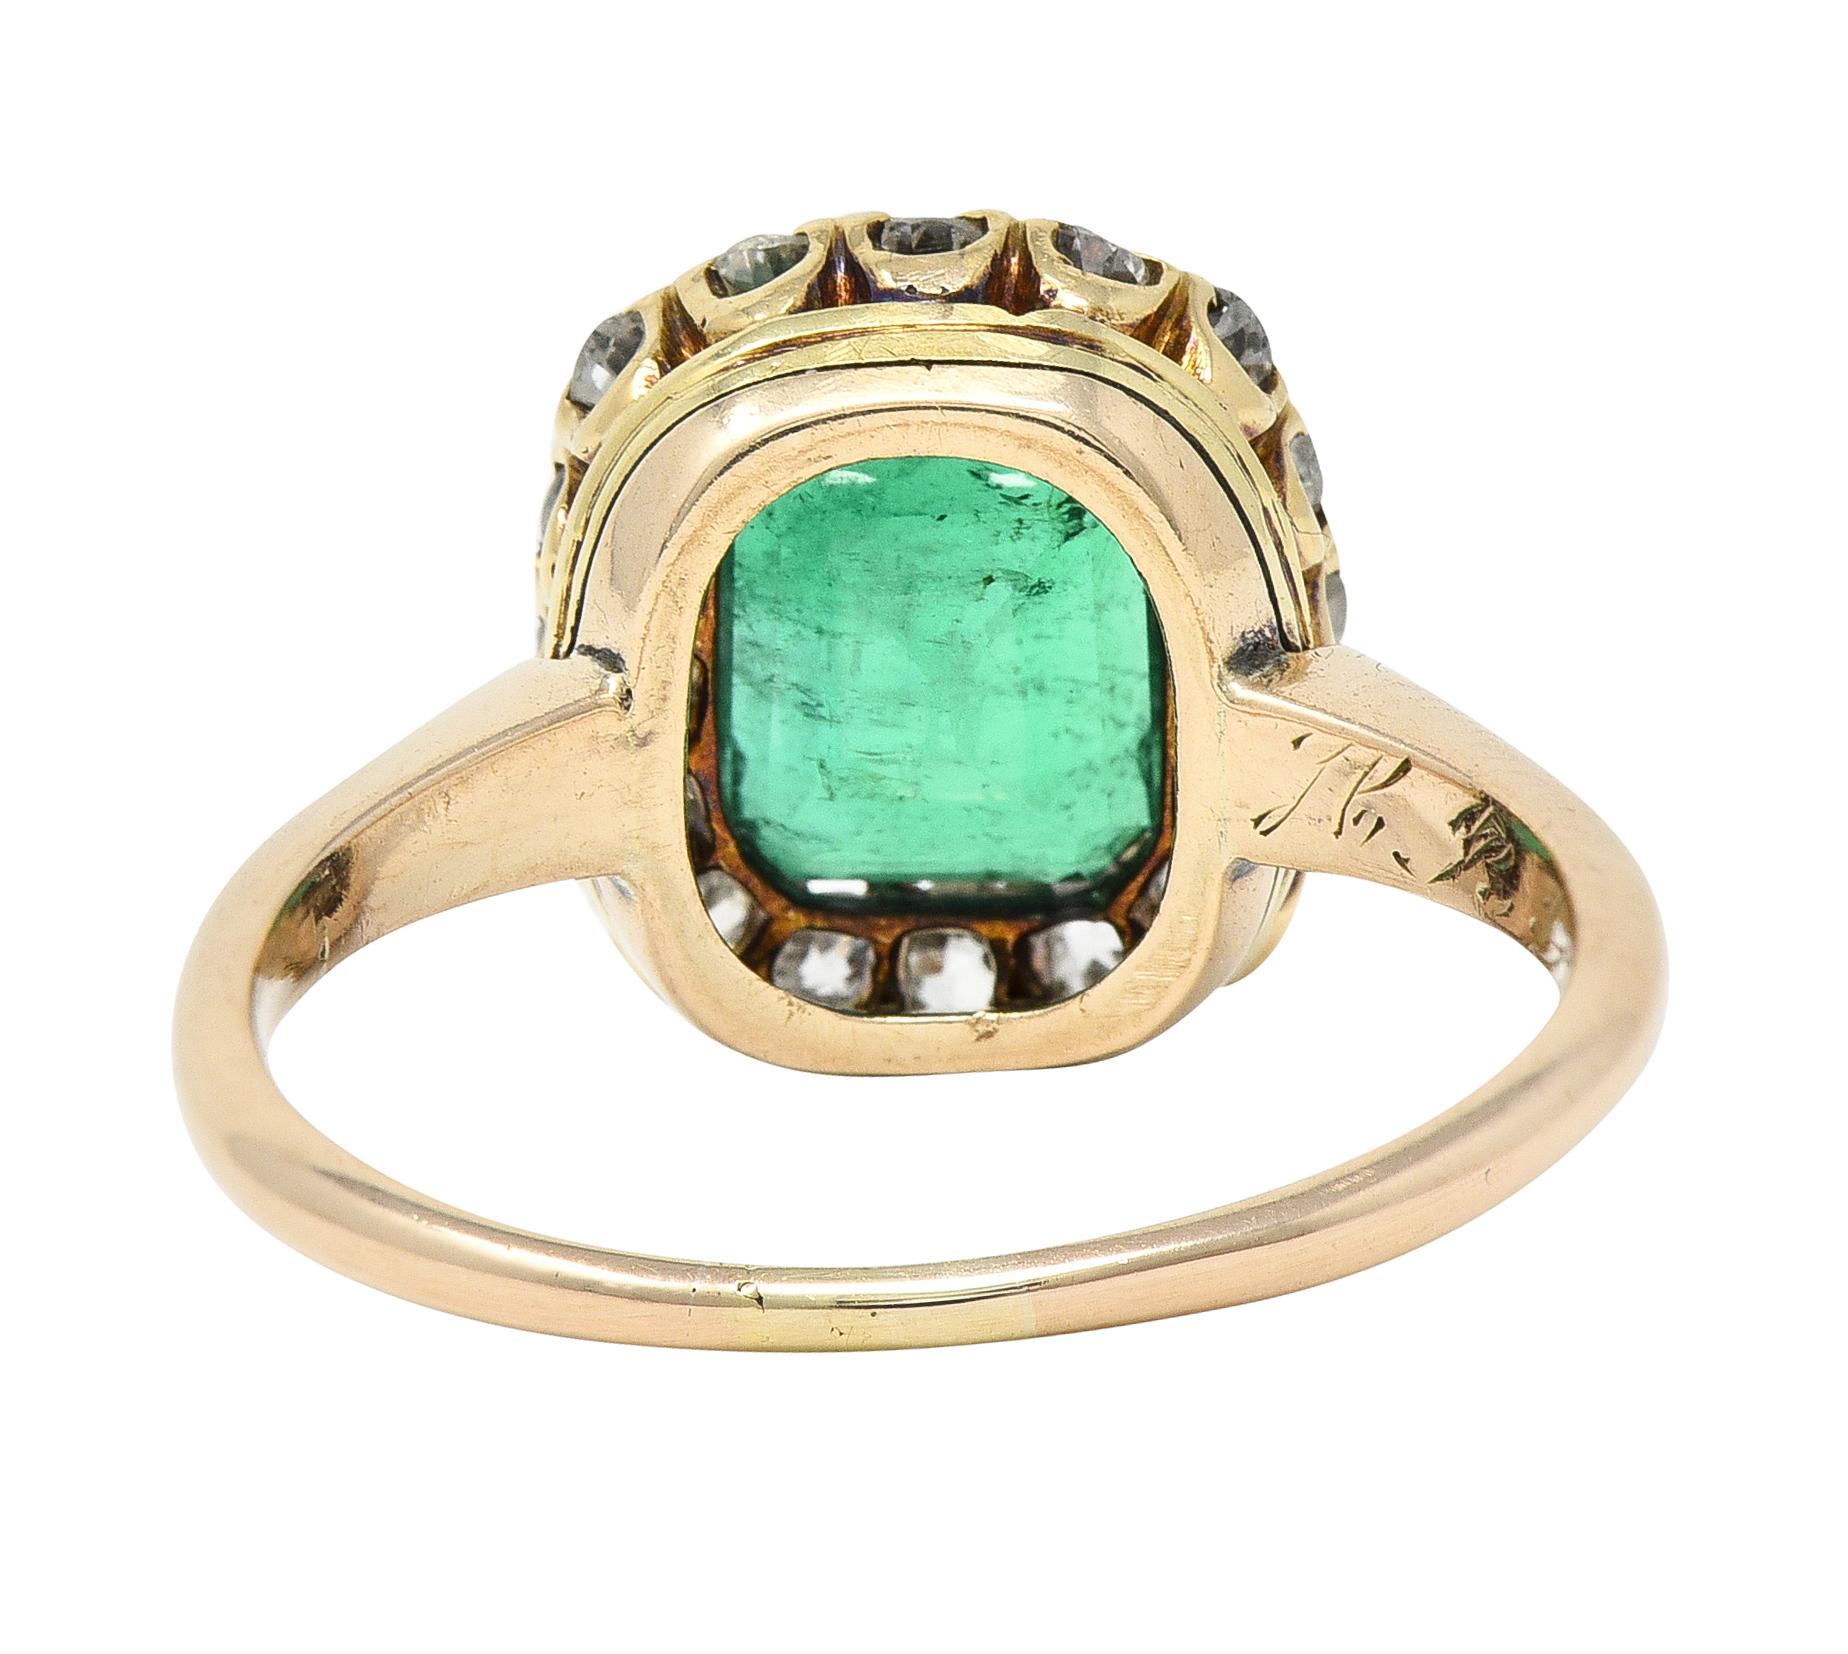 Victorian 2.51 CTW Colombian Emerald Diamond 14 Karat Yellow Gold Halo Ring GIA In Excellent Condition For Sale In Philadelphia, PA